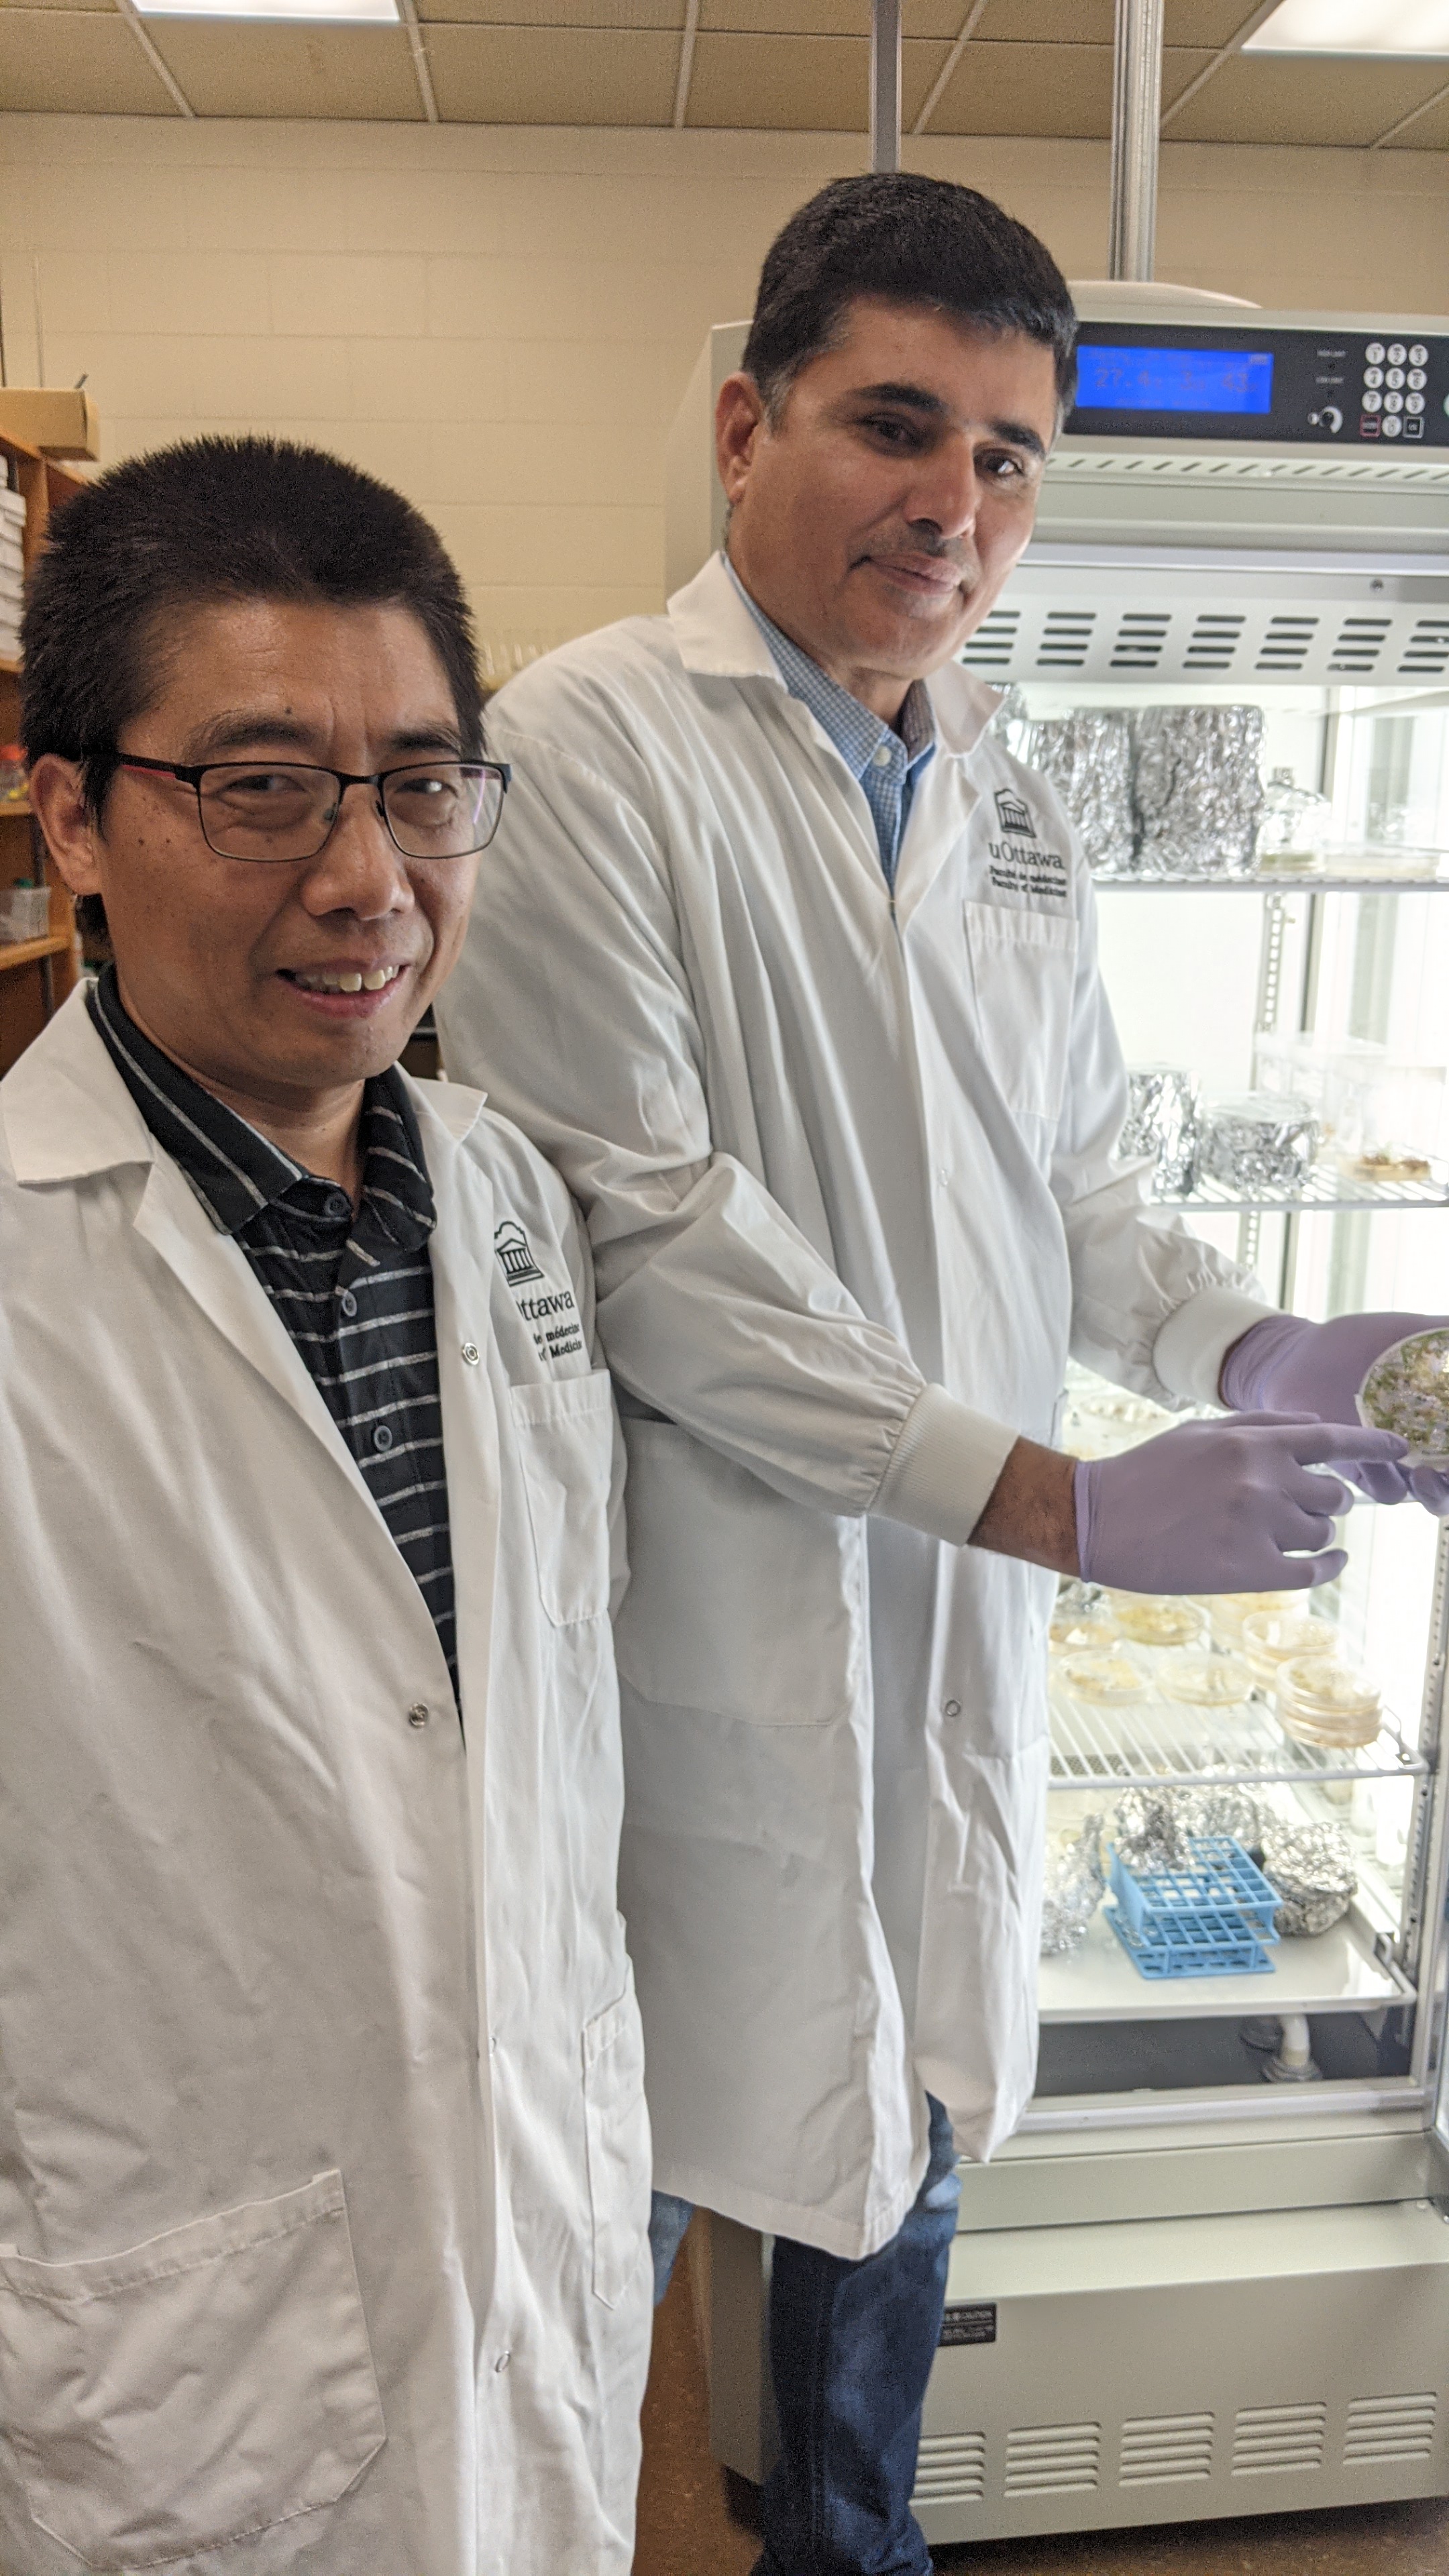 Biologists Tauqeer Ahmad and Weiya Xue conduct research at the Proteins Easy research facility on the Kemptville Campus, using the greenhouse to cultivate their genetically modified, high-yield rice plants.